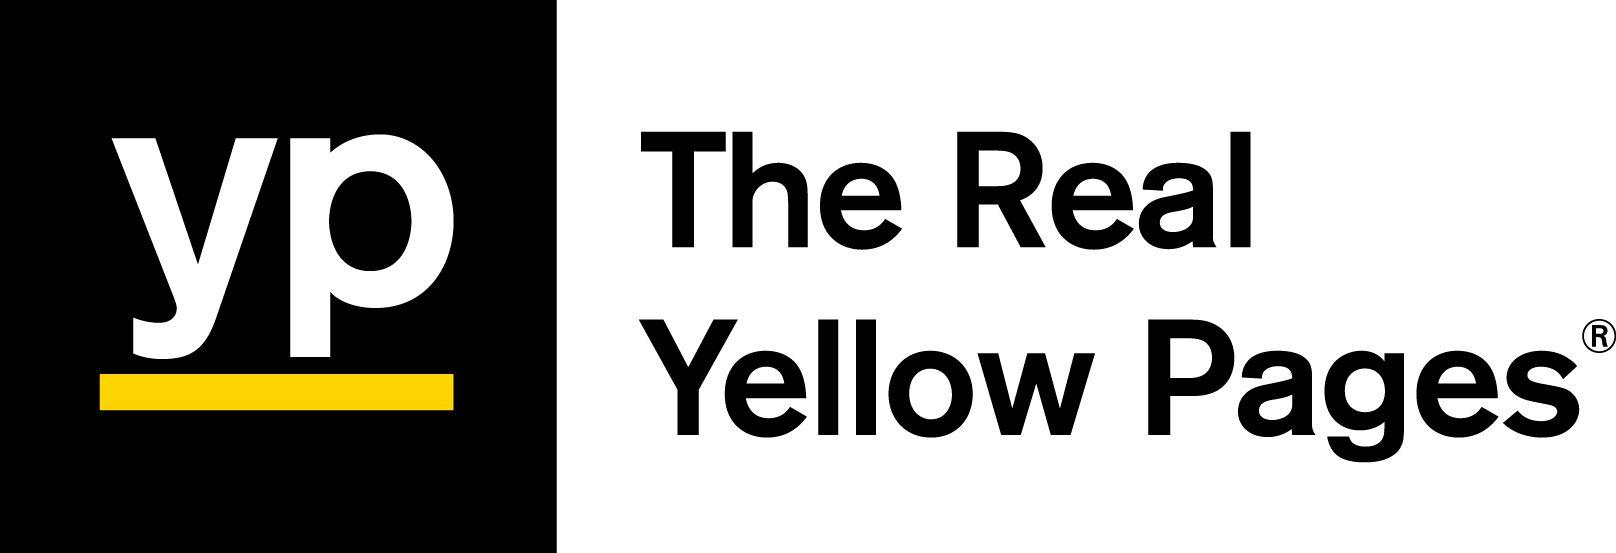 YP Yellow Pages Logo - YP Research Offers Insights on Consumers' Local Search and Spending